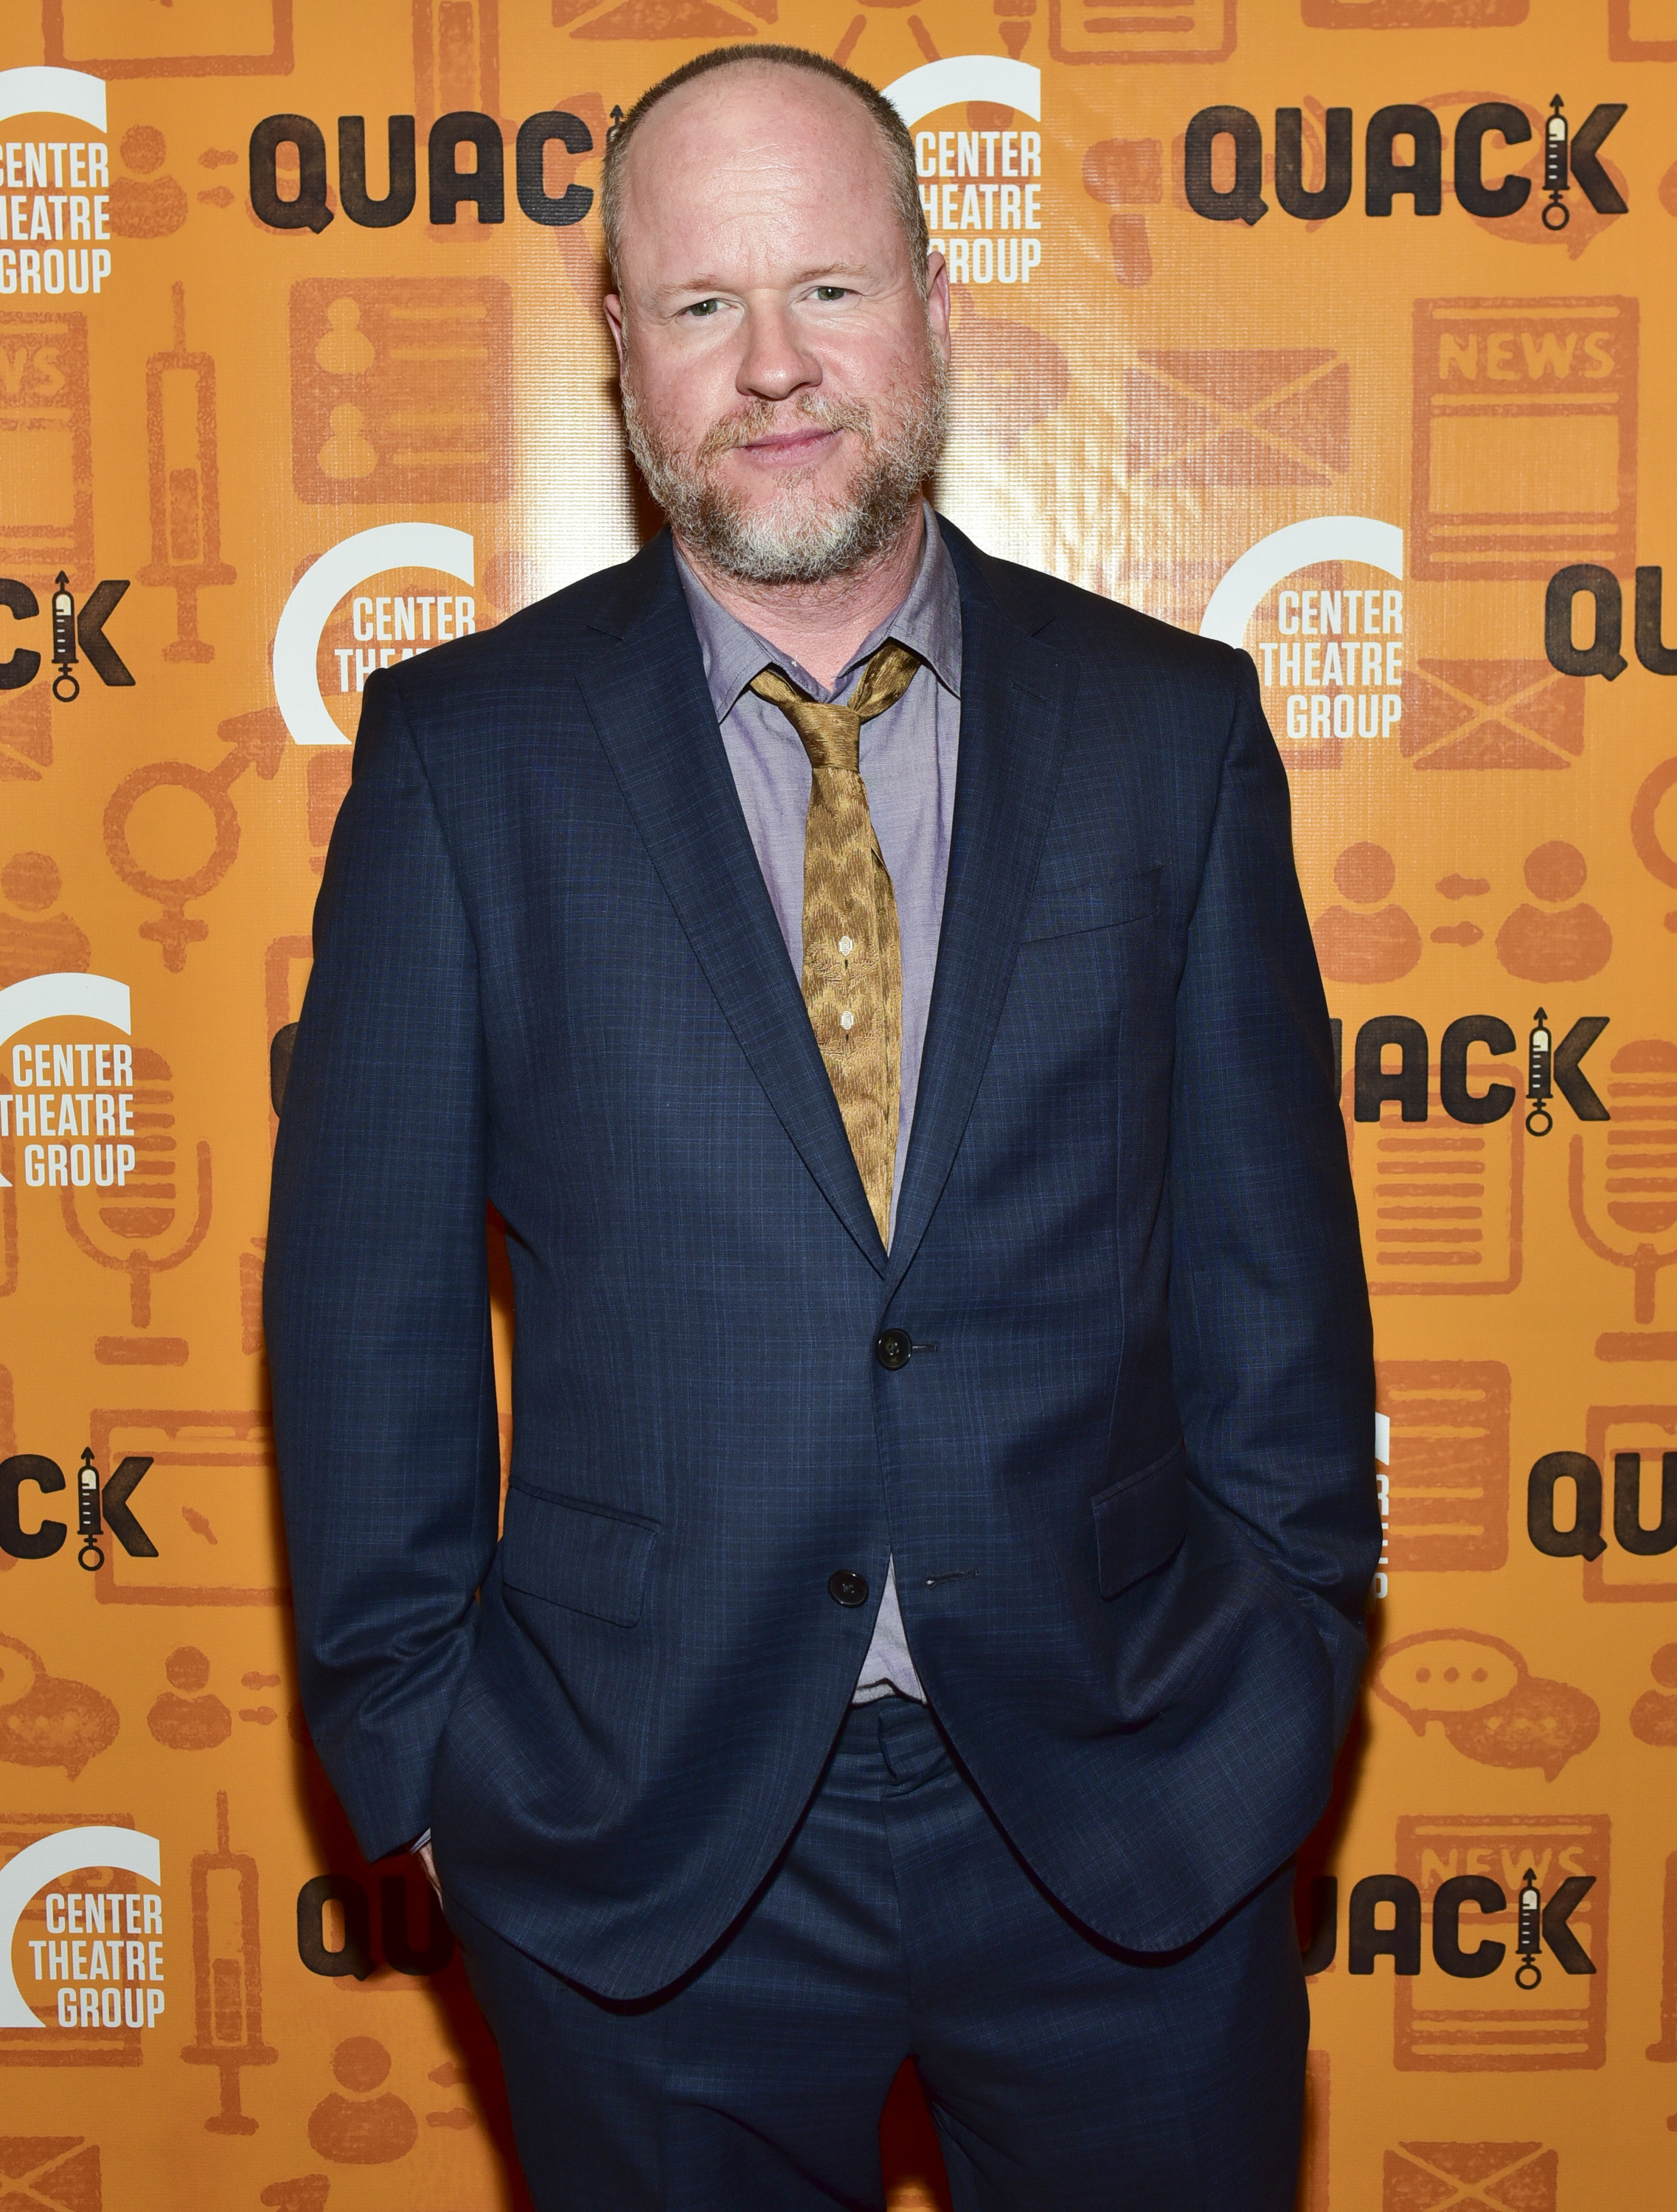 Joss Whedon posing on a red carpet